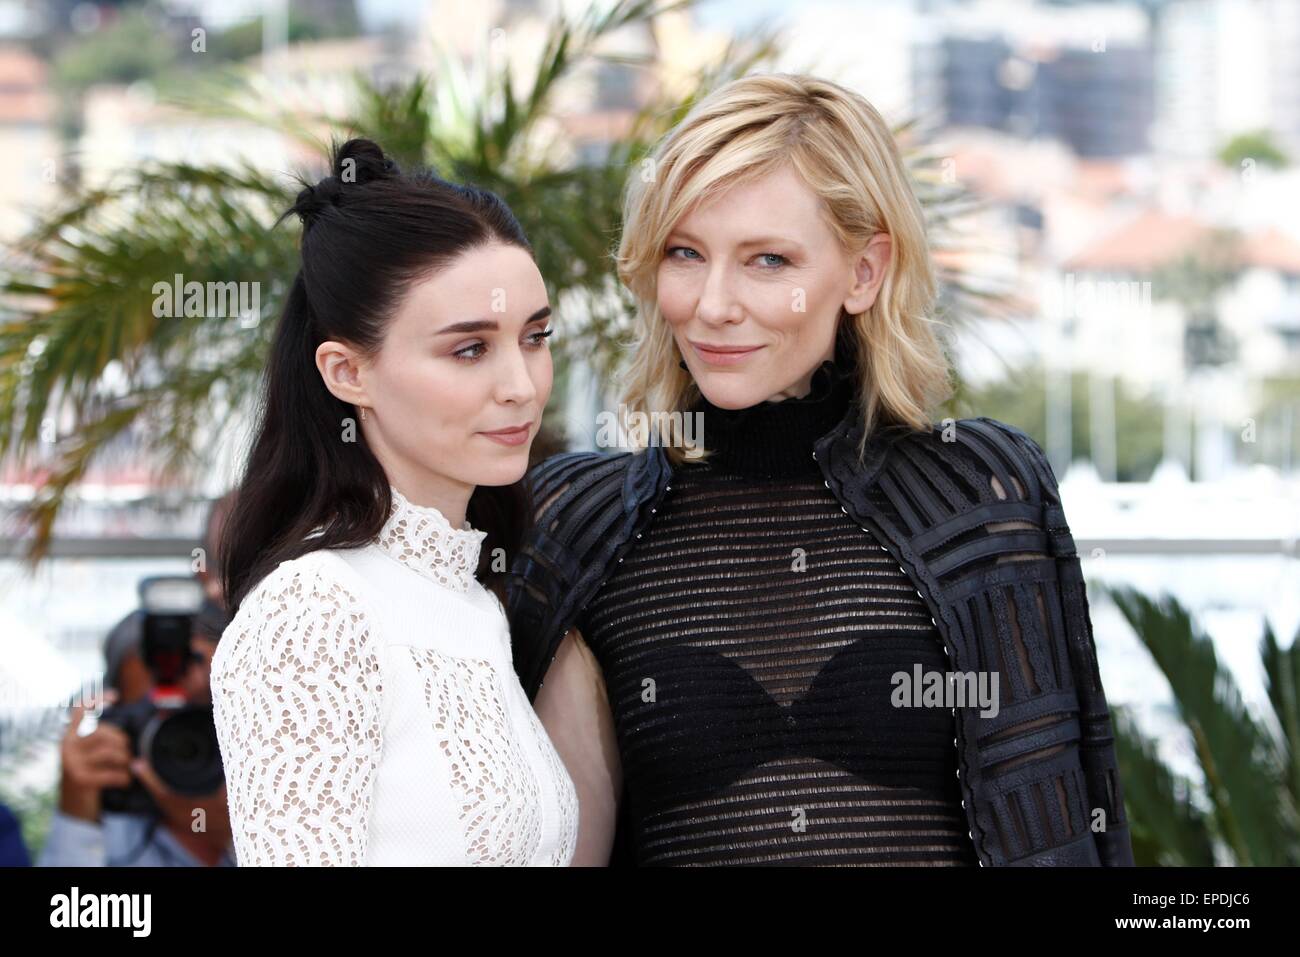 Cate Blanchett and Rooney Mara are Longing Lovers in Gorgeous